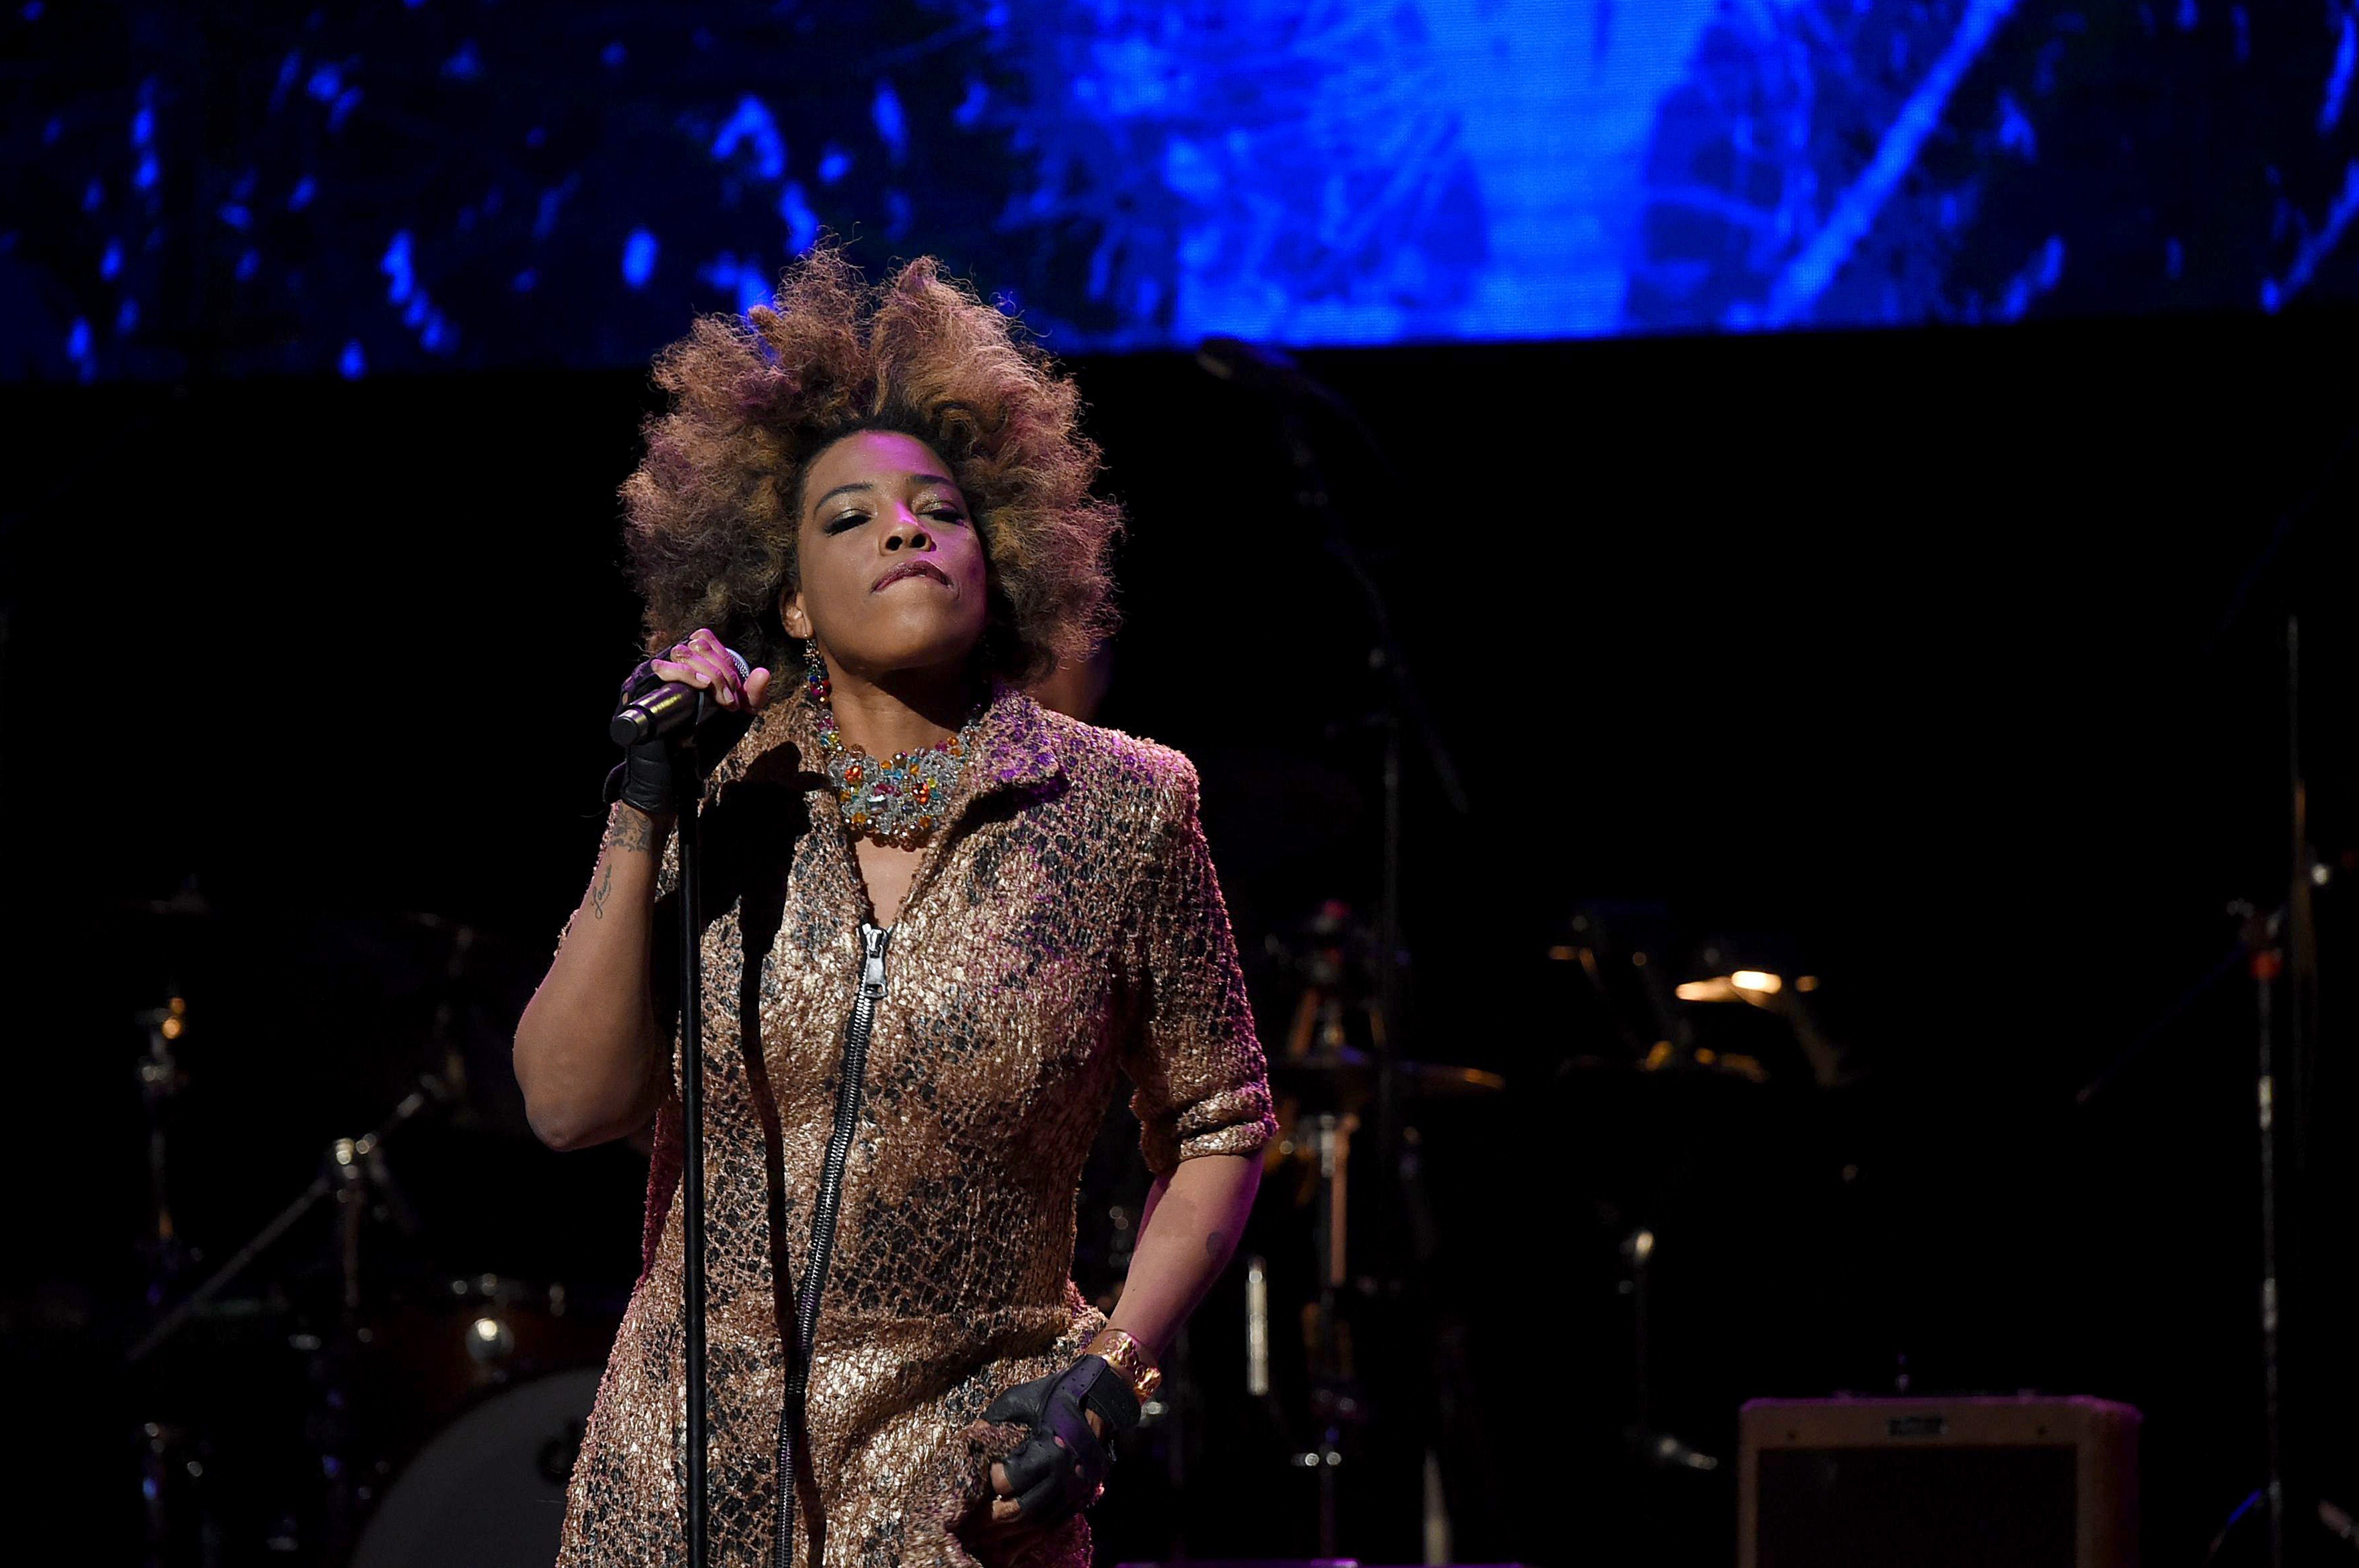 Macy Gray at the Fourth Annual LOVE ROCKS NYC benefit concert for God's Love We Deliver at Beacon Theatre on March 12, 2020 in New York City. | Source: Shutterstock